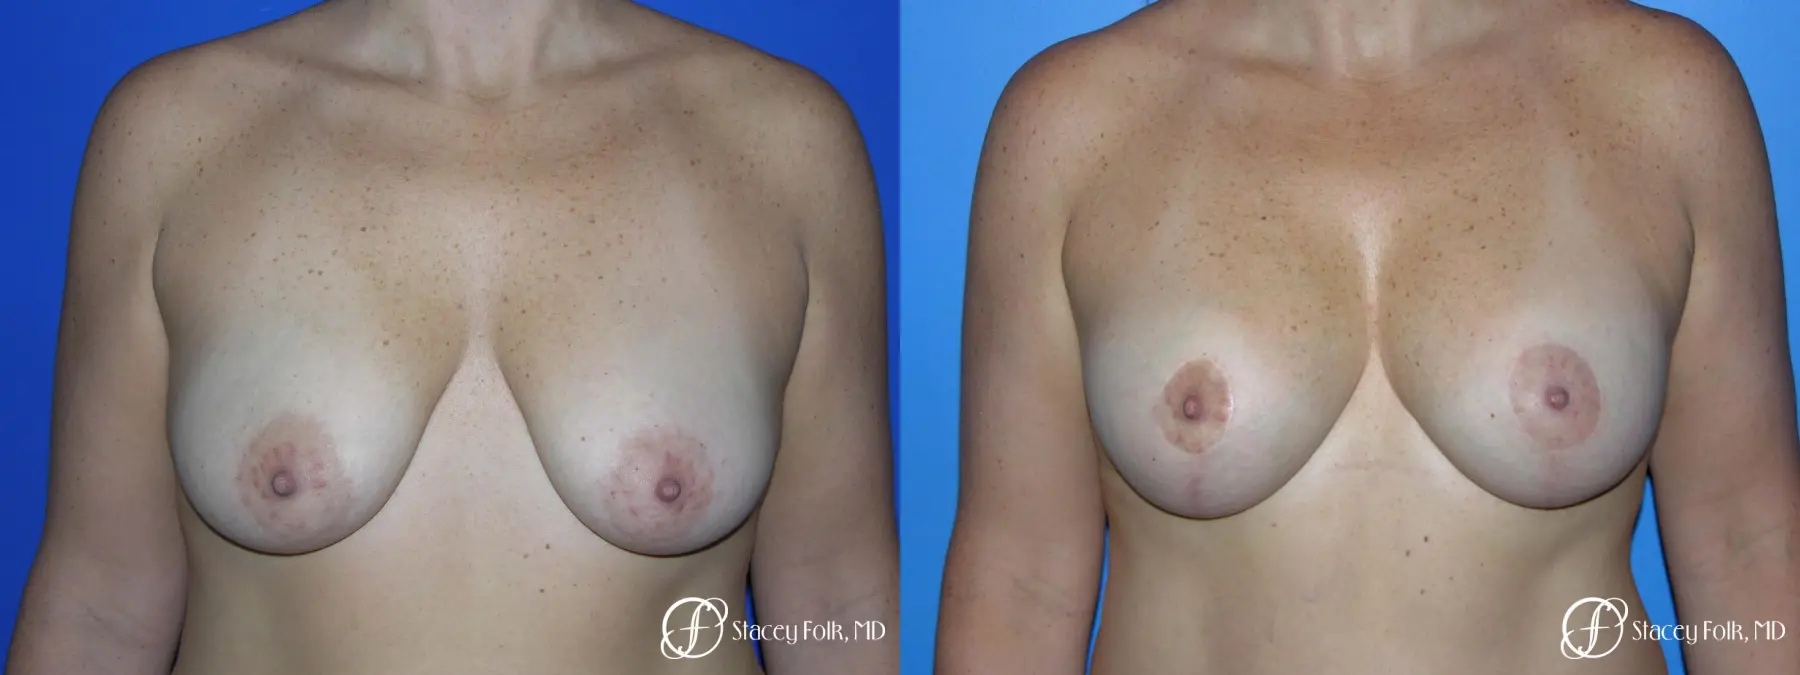 Denver Breast Lift - Mastopexy Augmentation 7989 - Before and After 1